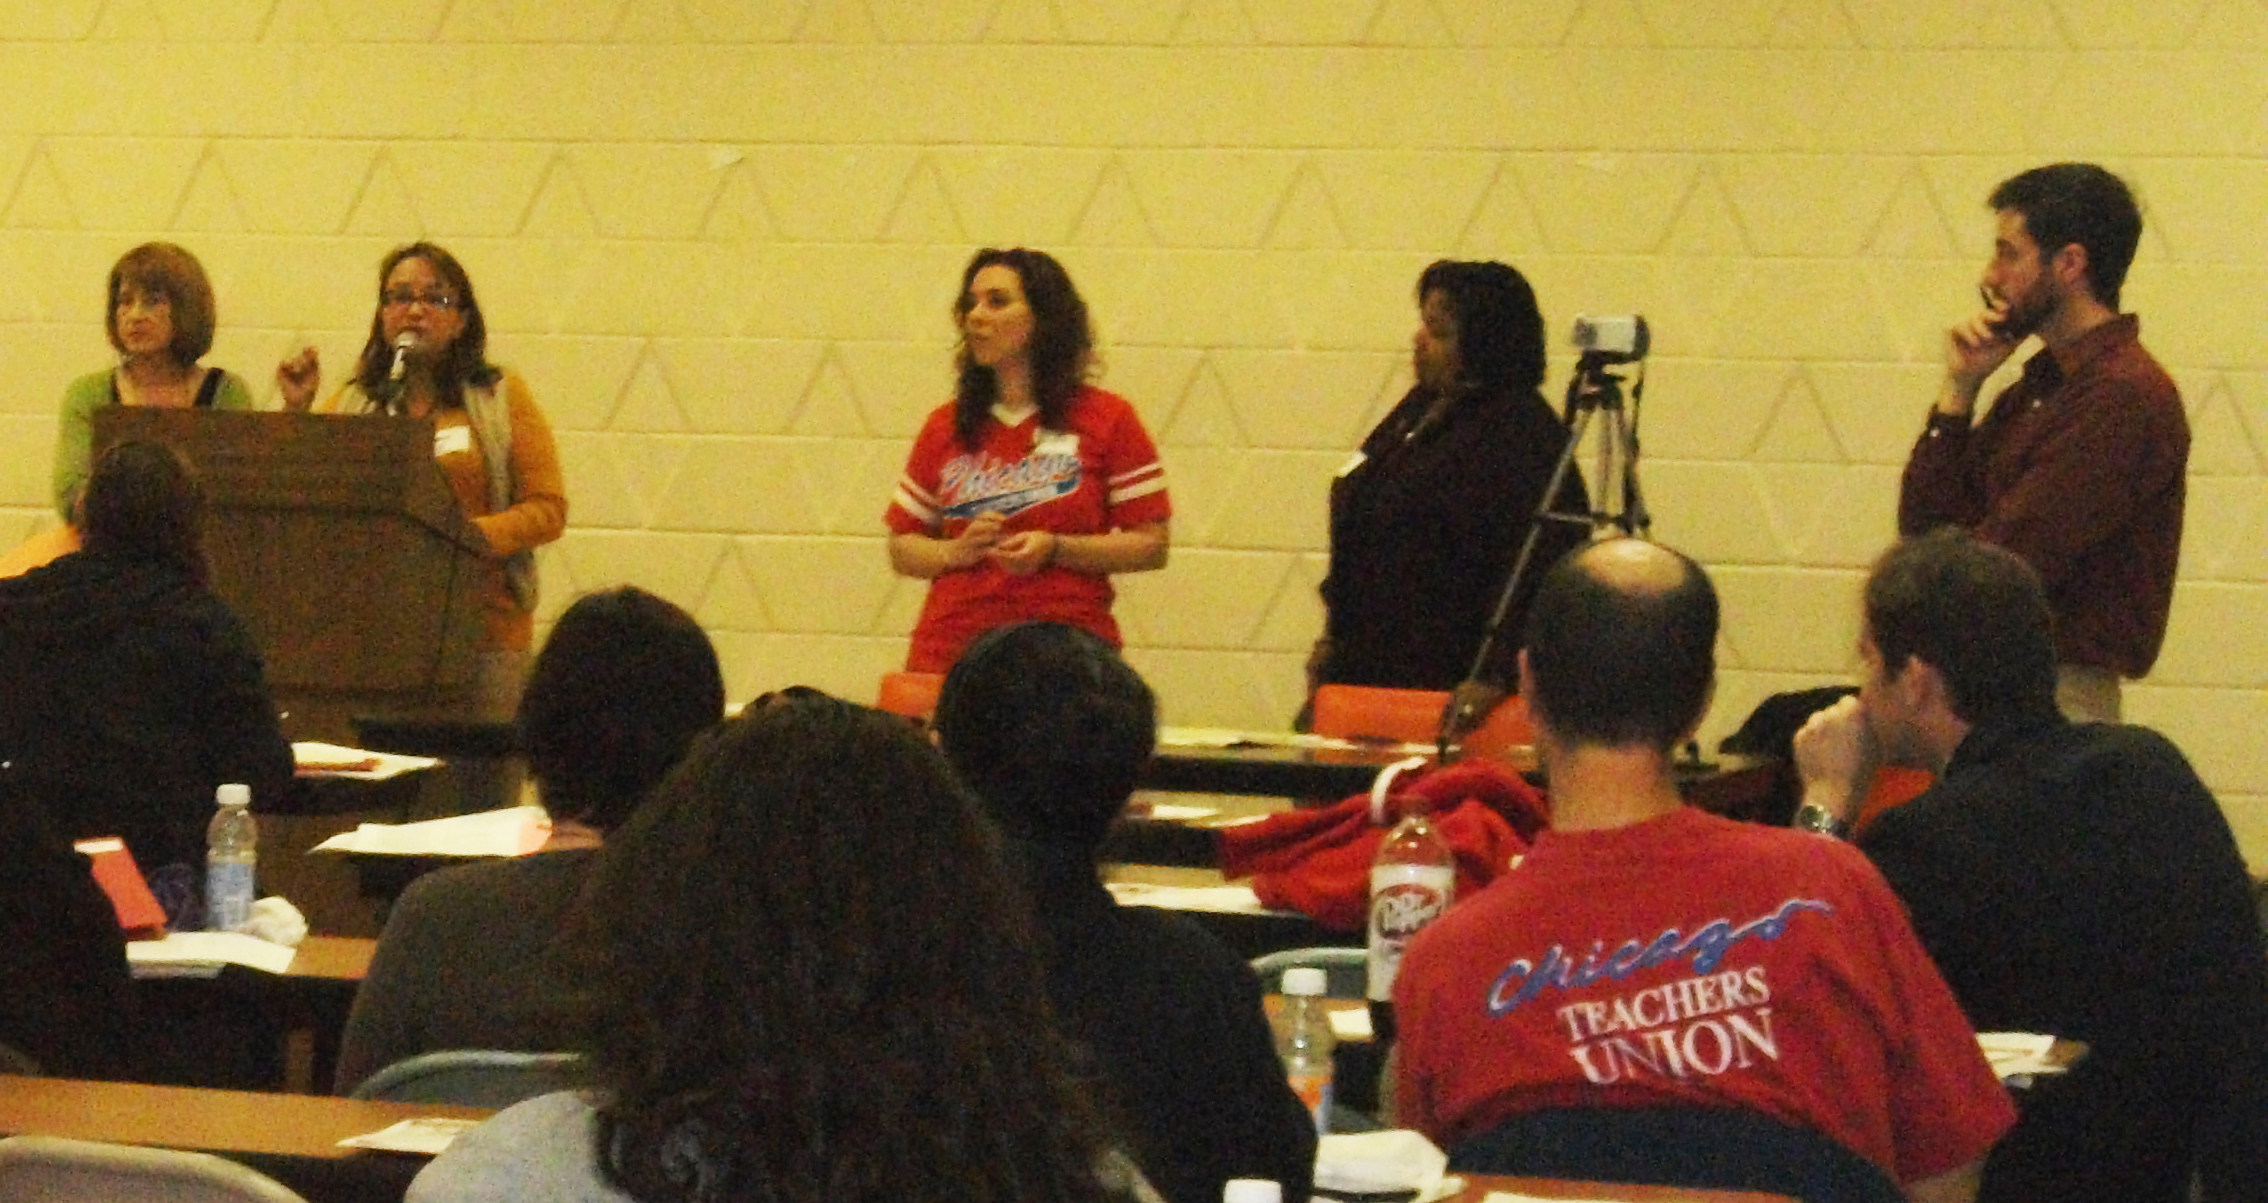 Chicago Teachers Union staff addressed the delegates at the November 29, 2012 training sessions. Substance photo by Jean Schwab.